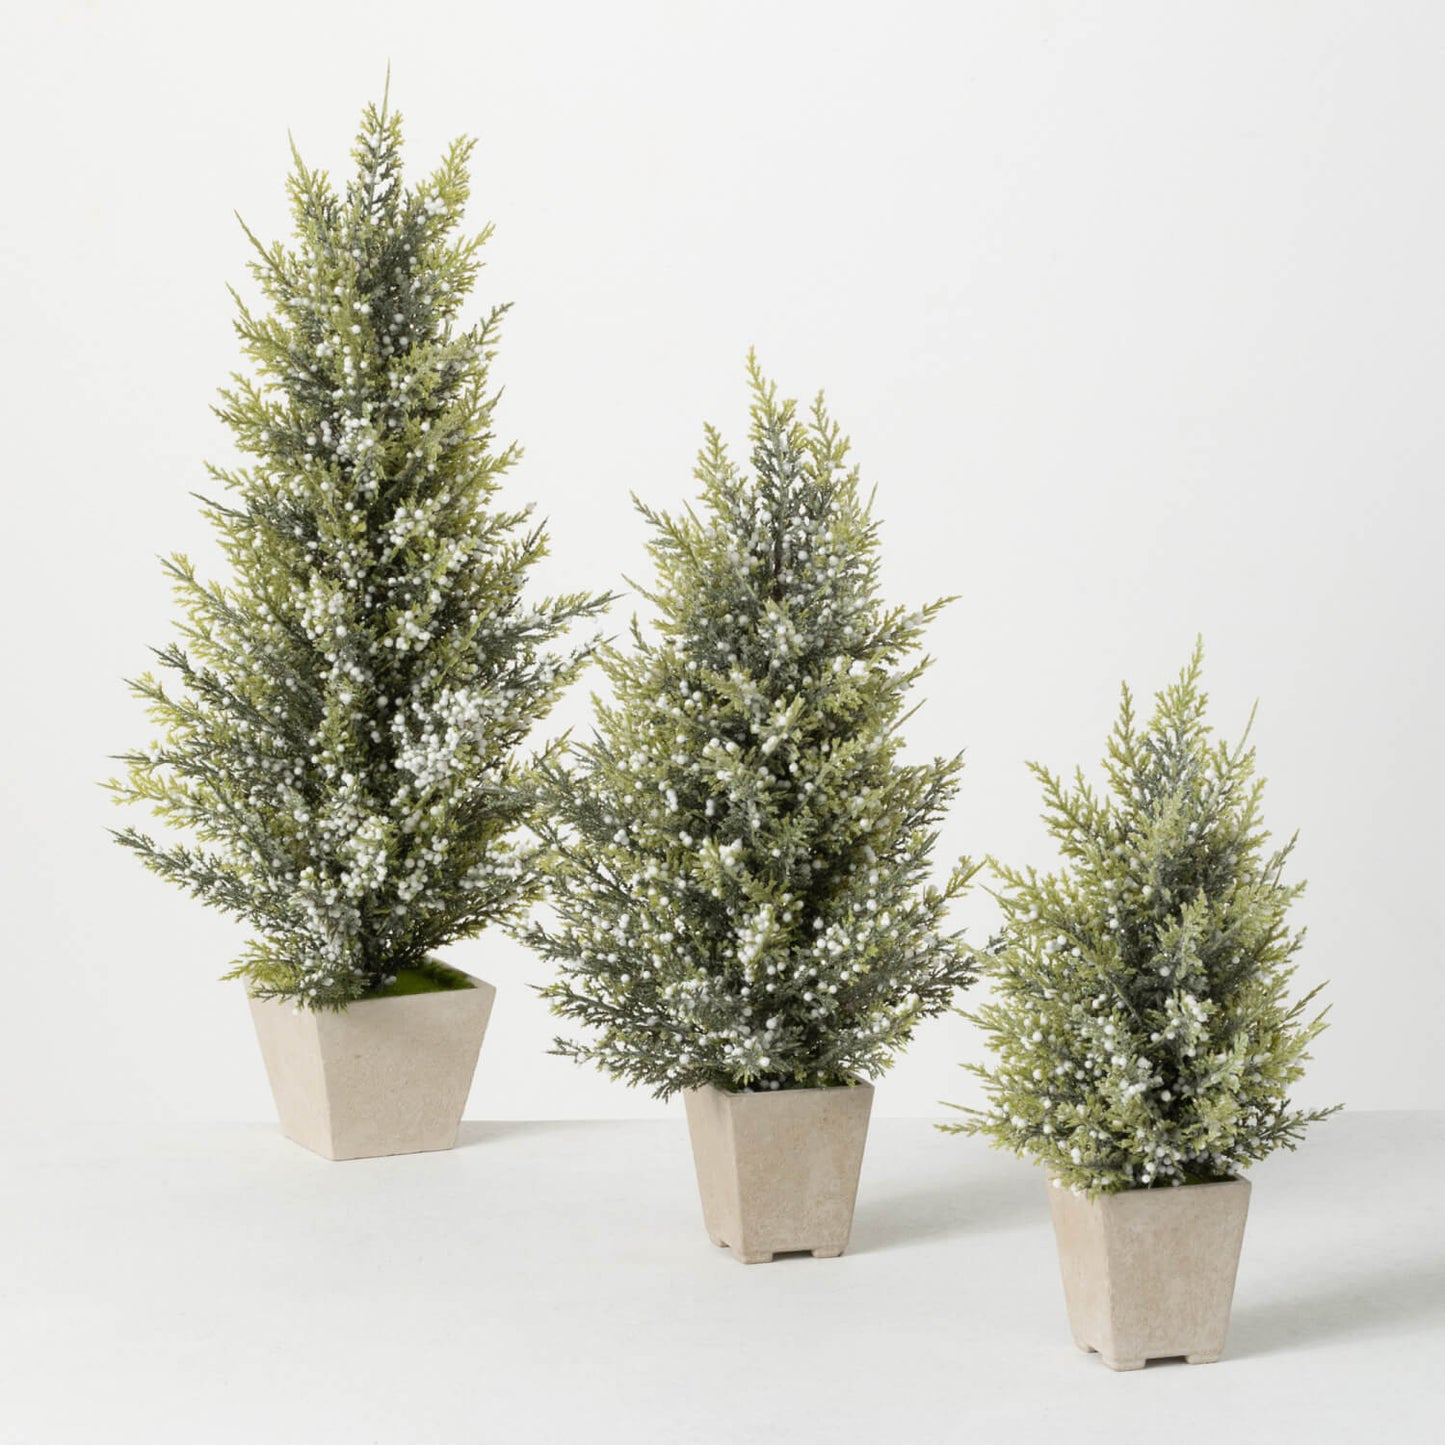 POTTED PINE & BERRY TREE SET